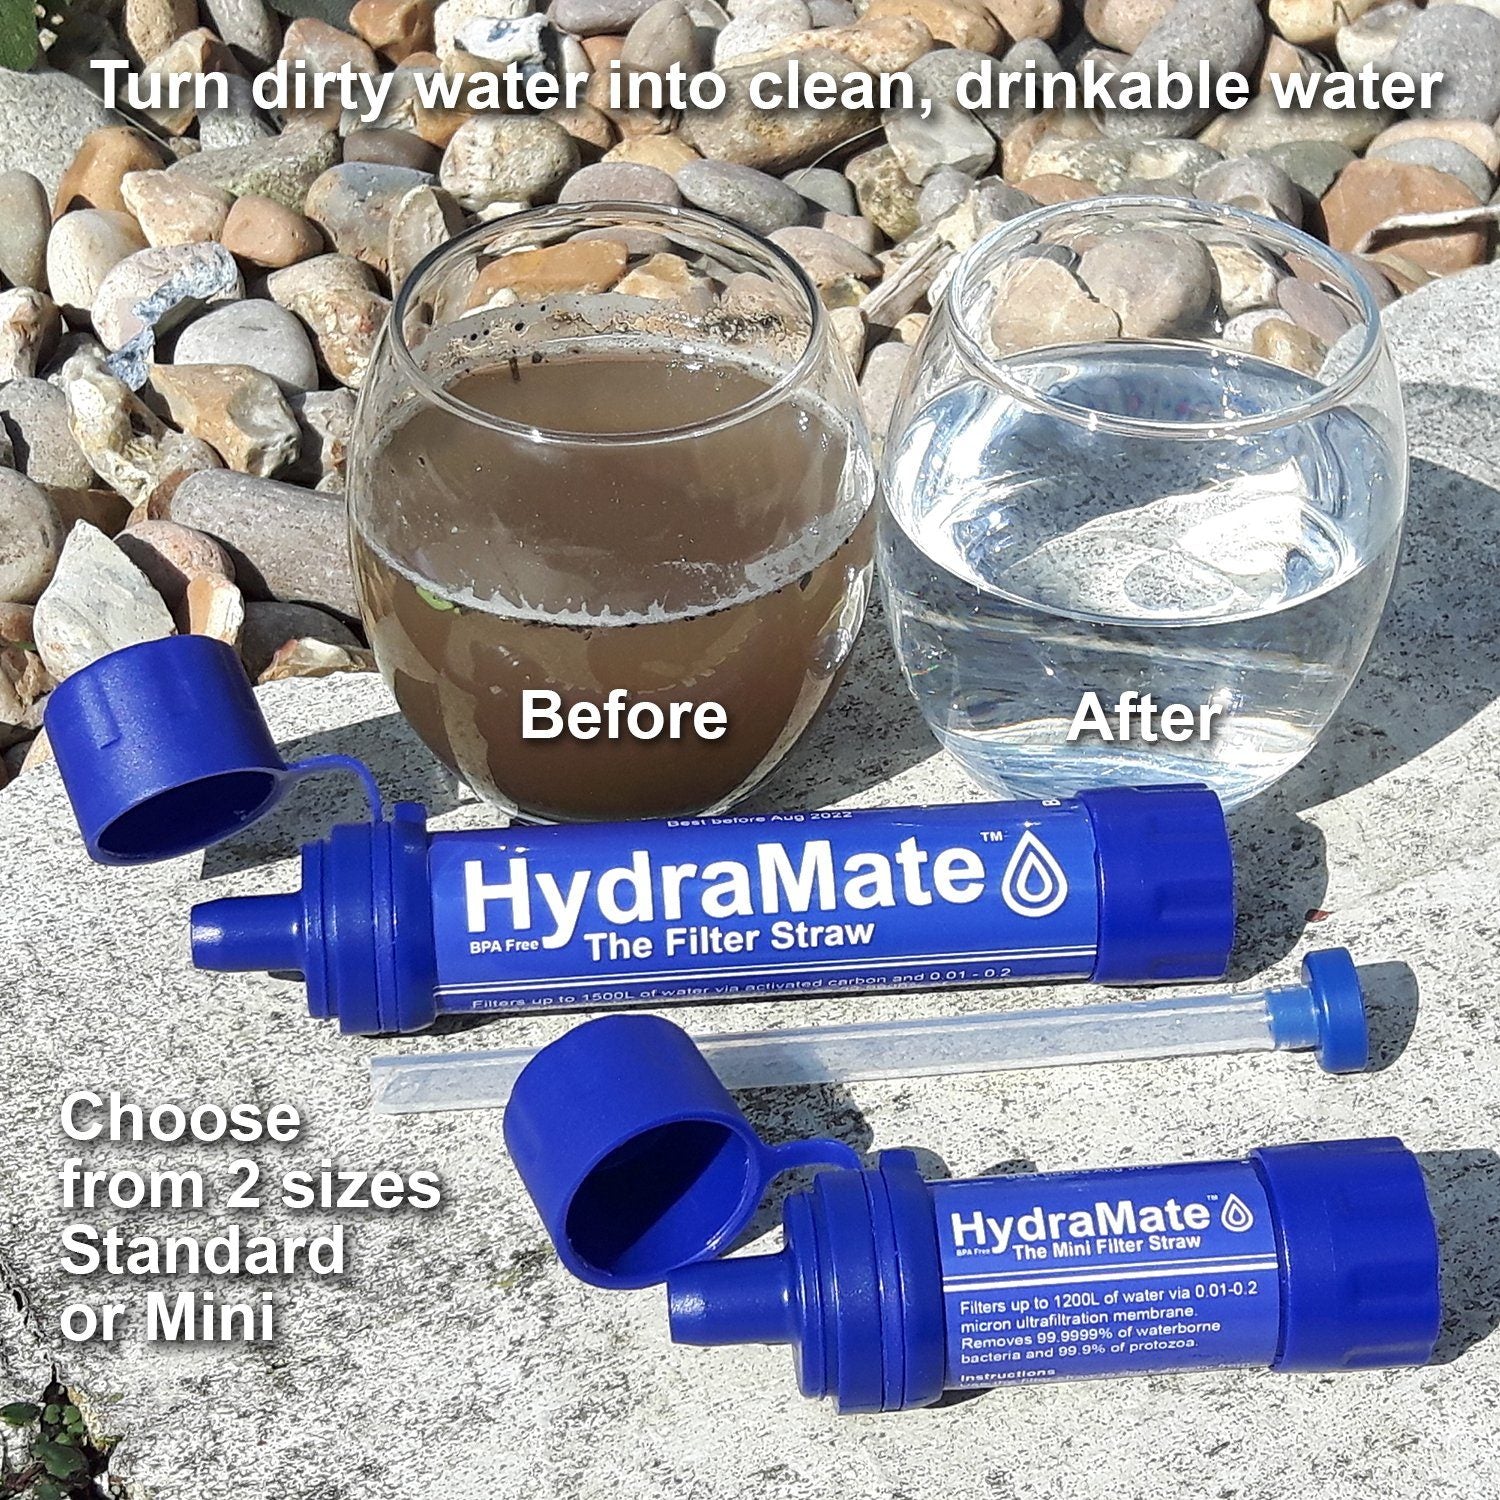 HydraMate Water Filter Straw With carbon and mini